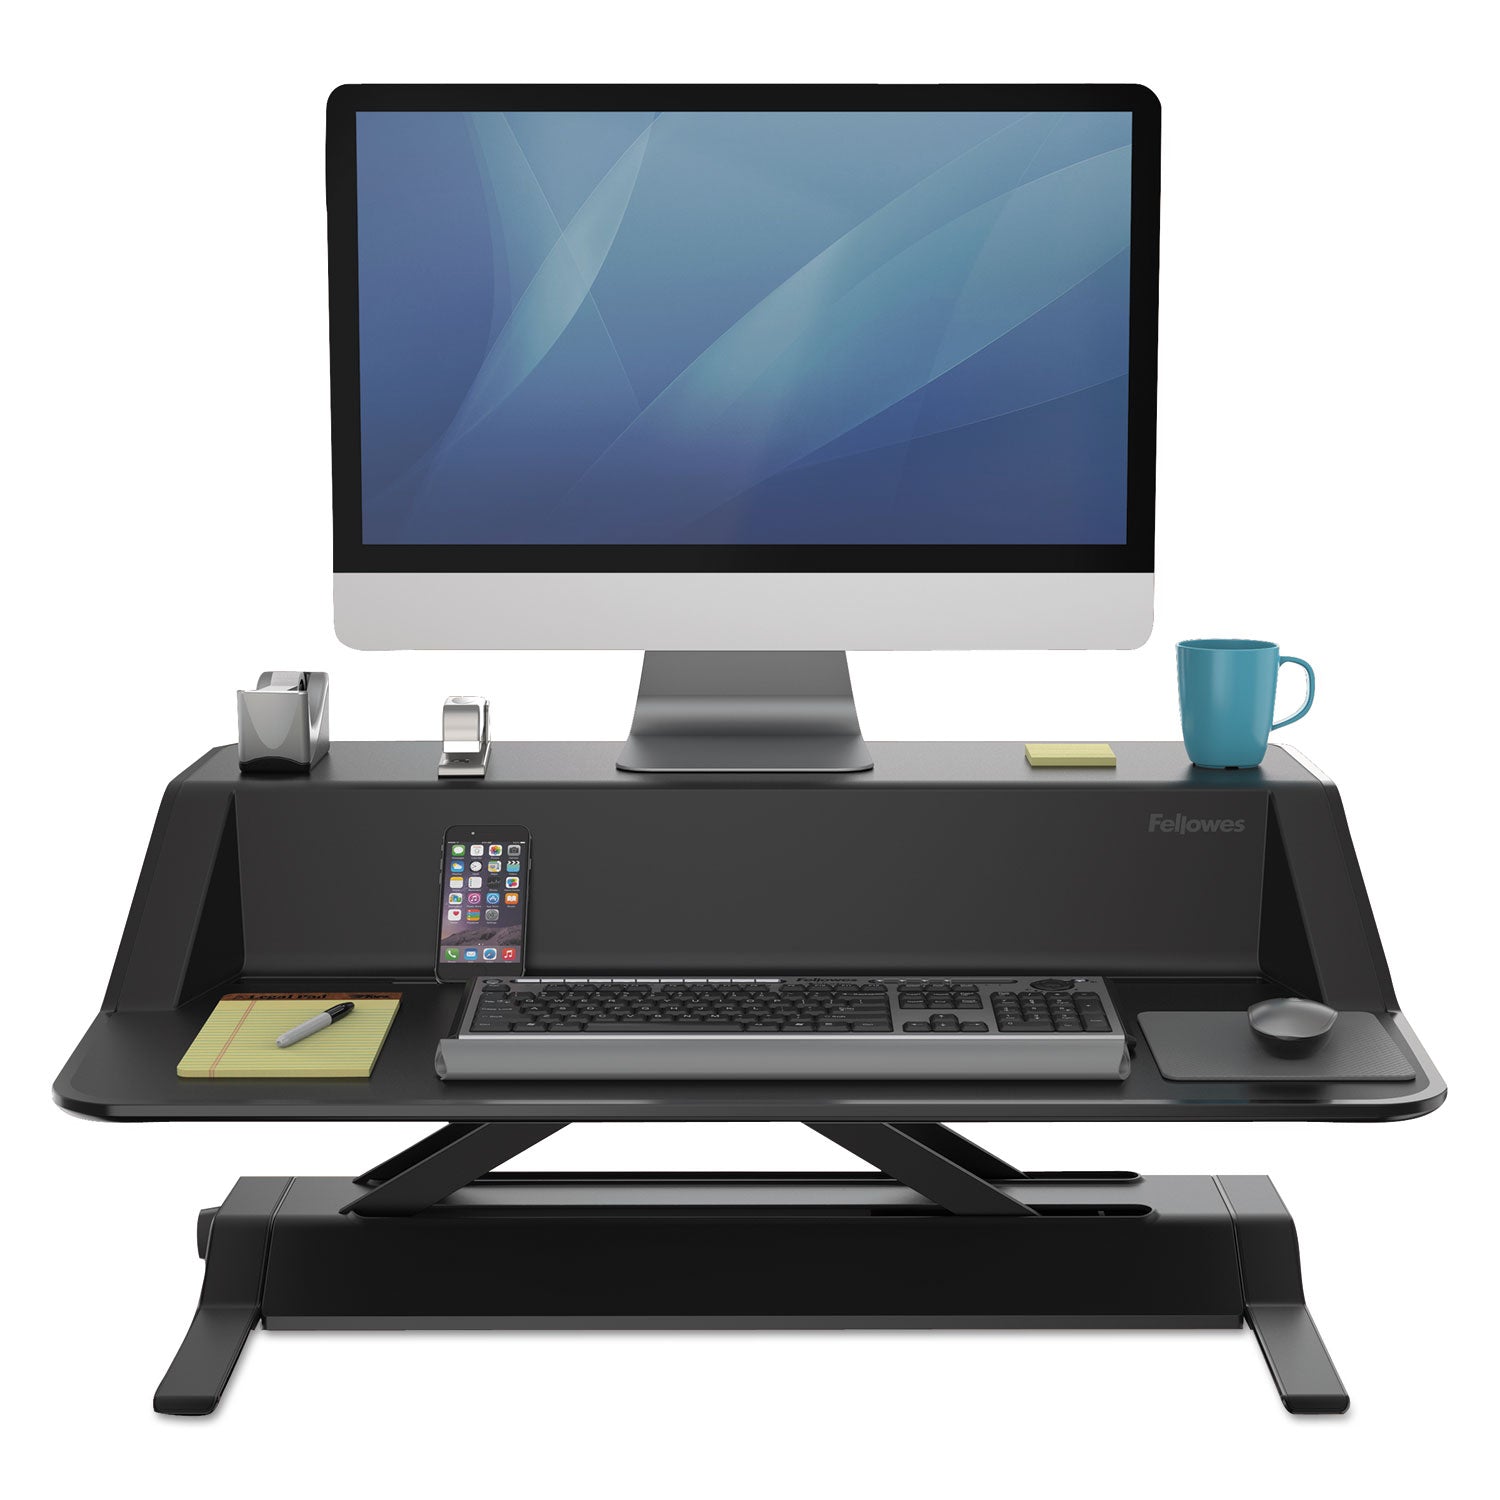 Lotus Sit-Stands Workstation, 32.75" x 24.25" x 5.5" to 22.5", Black - 6